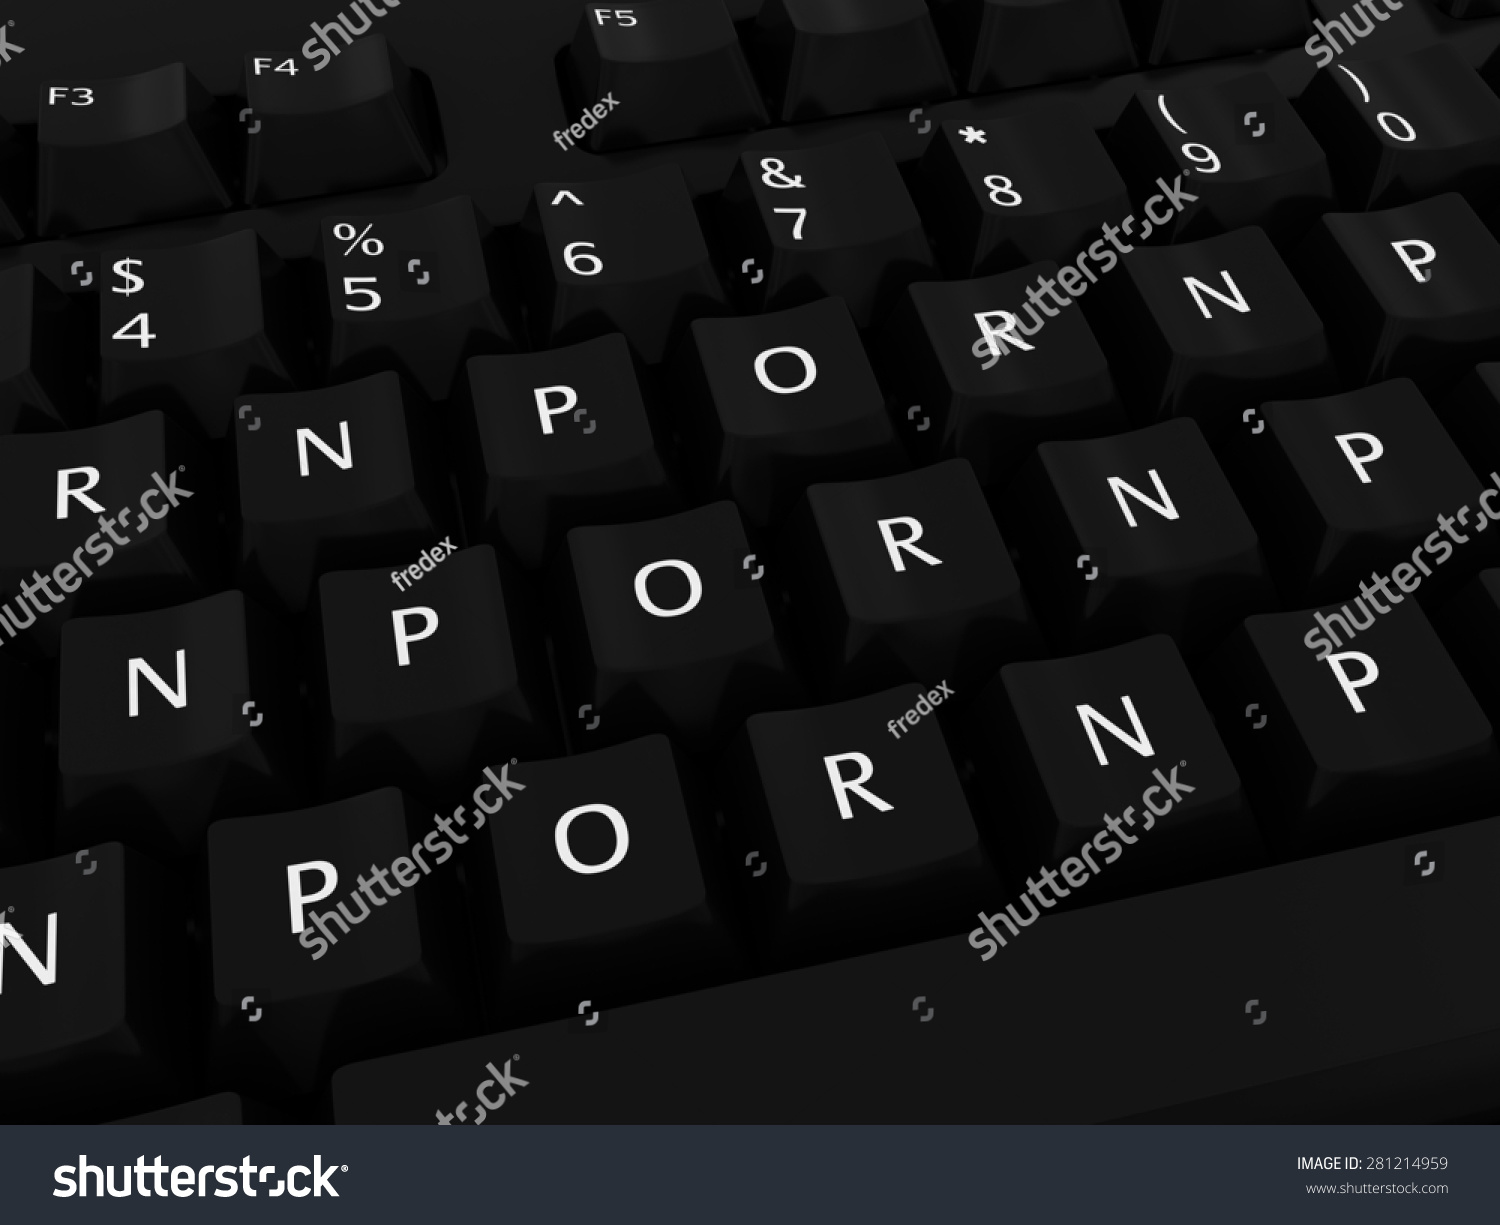 Find Porn Porn Porn Computer Keyboard Background stock images in HD and mil...